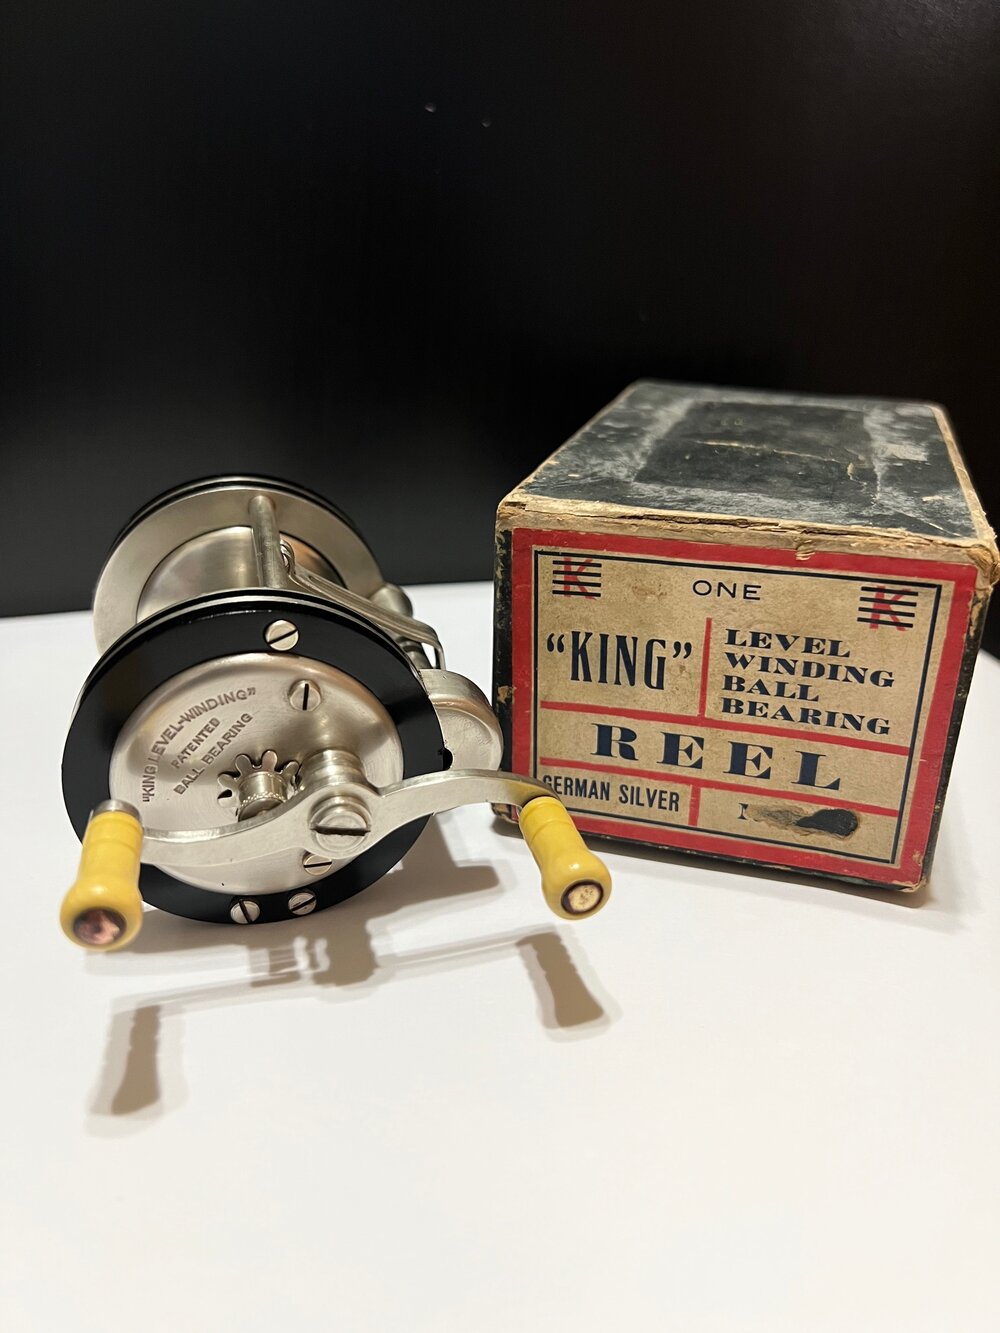 The YALE KING No. 77 Reel by Yale Metal Products Co. New York, NY. German  Silver Level Wind with Original Box Circa-1922 — VINTAGE FISHING REELS